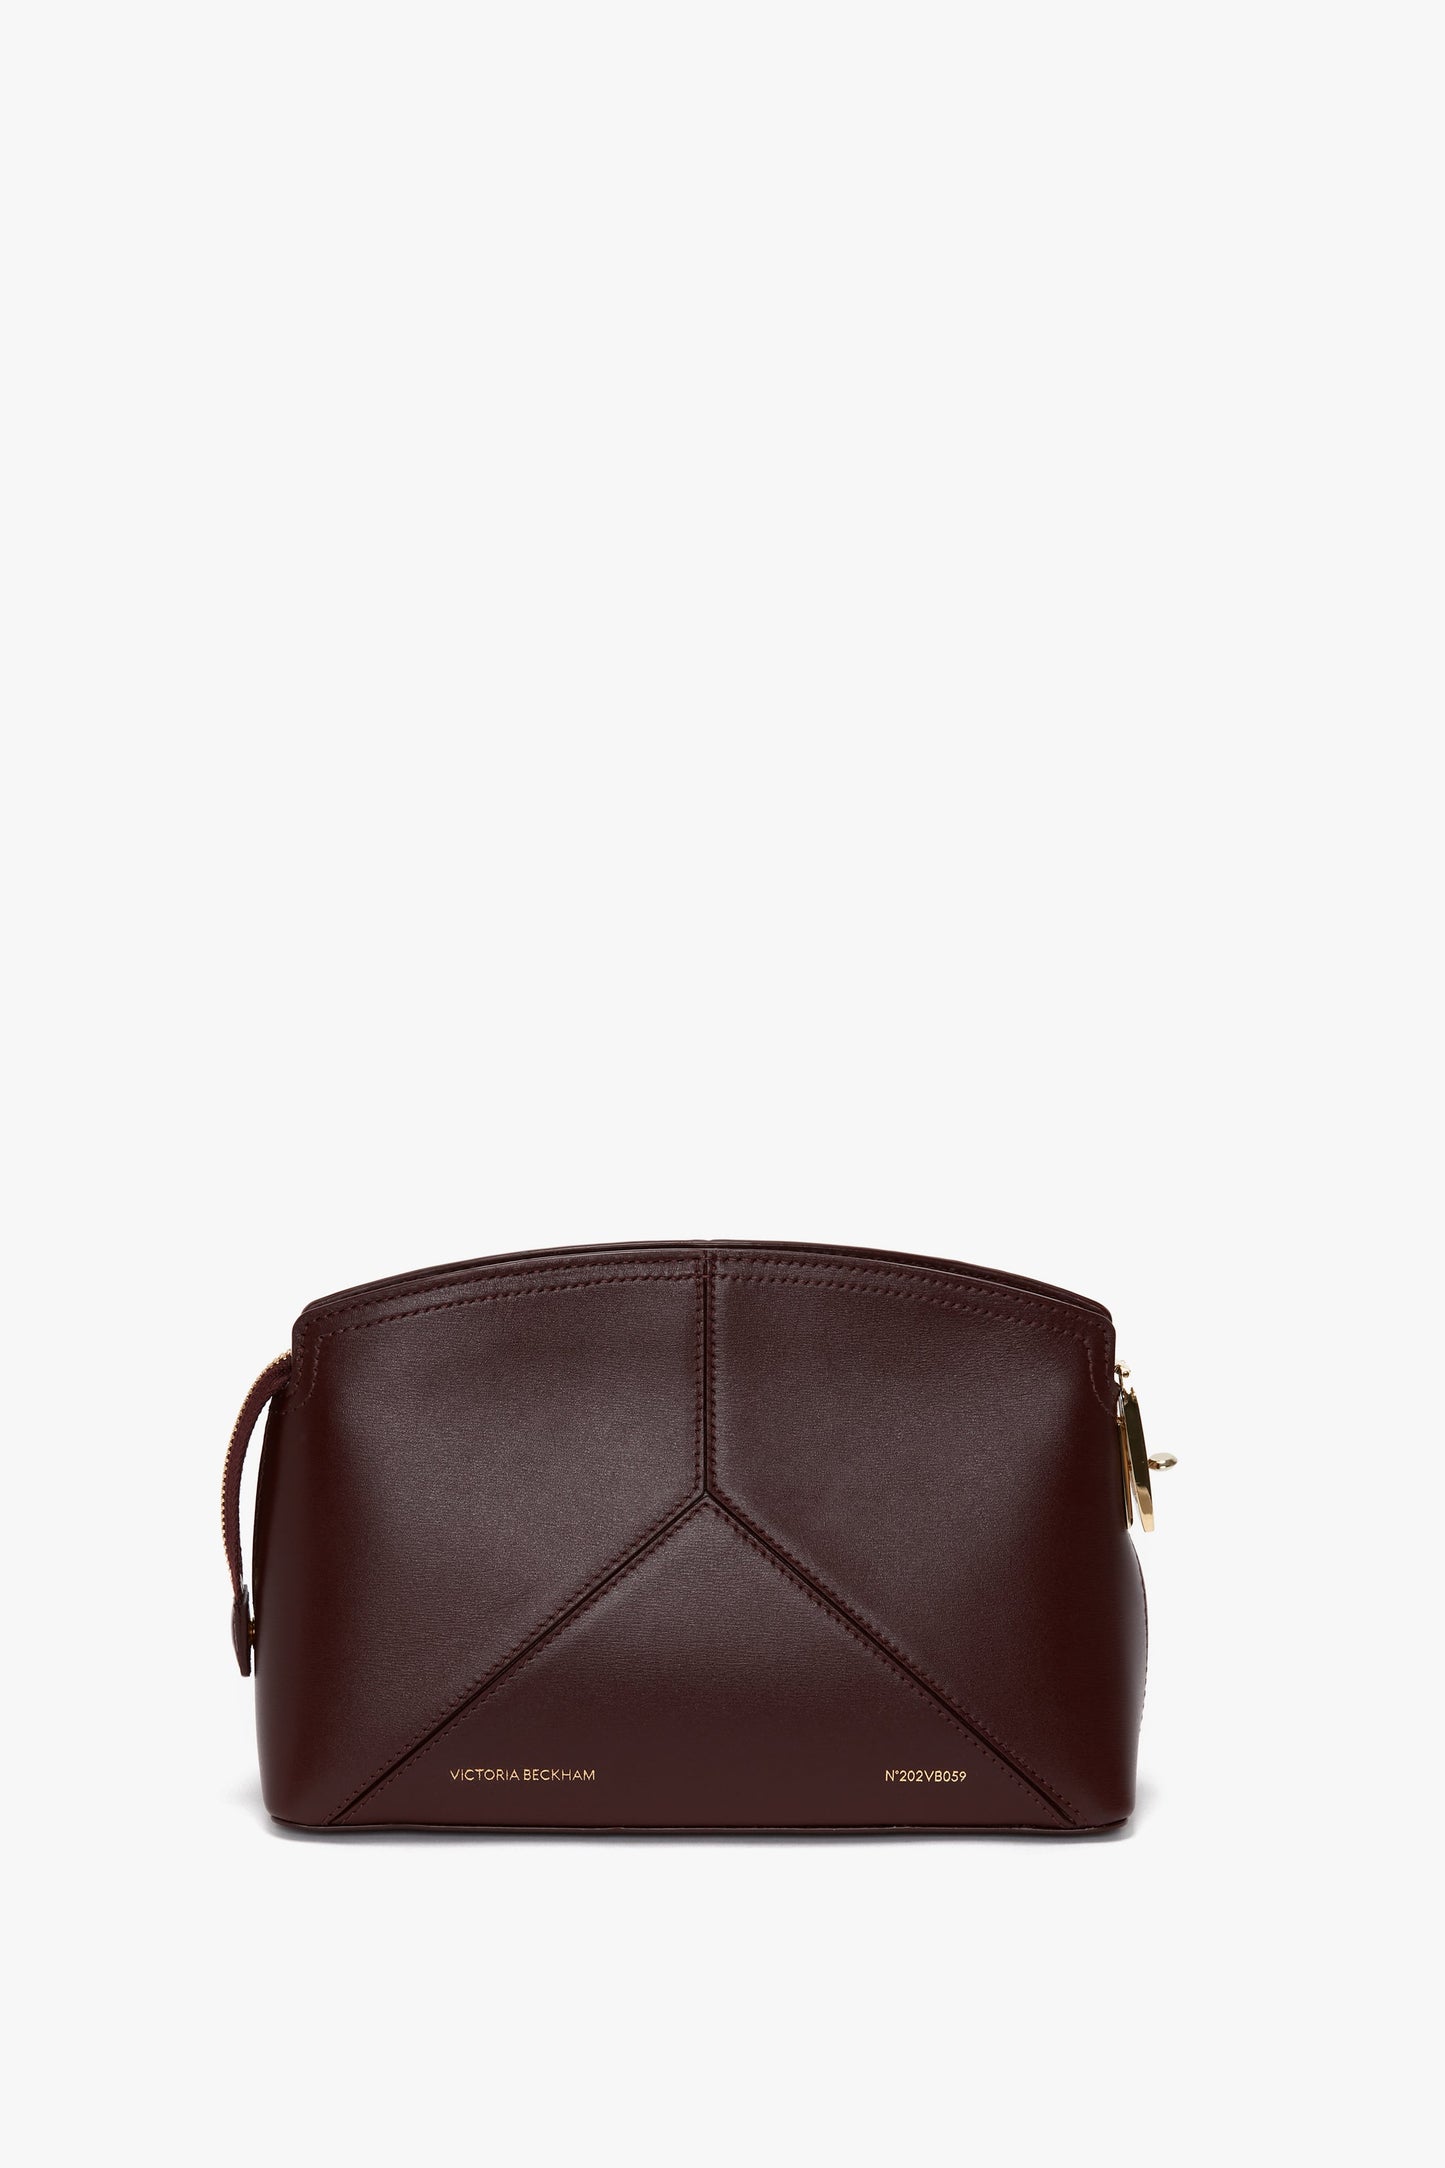 A Victoria Beckham Victoria Crossbody Bag In Burgundy Leather with a gold zipper and geometric stitching, crafted from textured calf leather. The front displays embossed gold lettering.